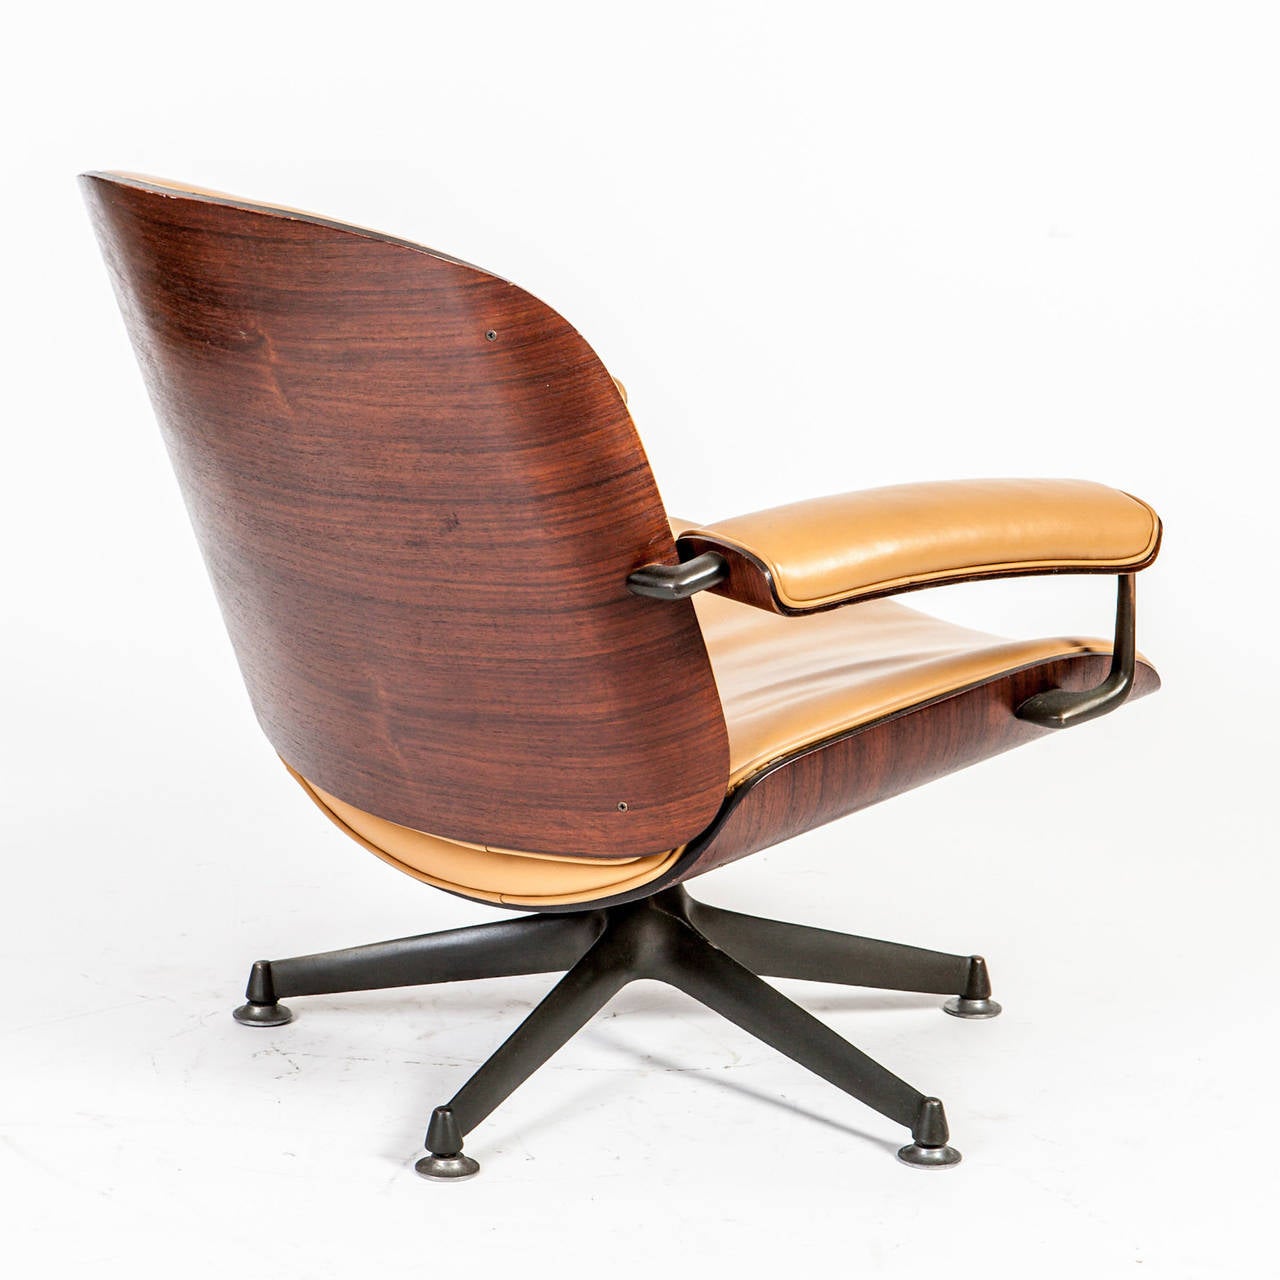 Italian Midcentury Rosewood and cognac Leather Lounge Chair by Ico Parisi  1